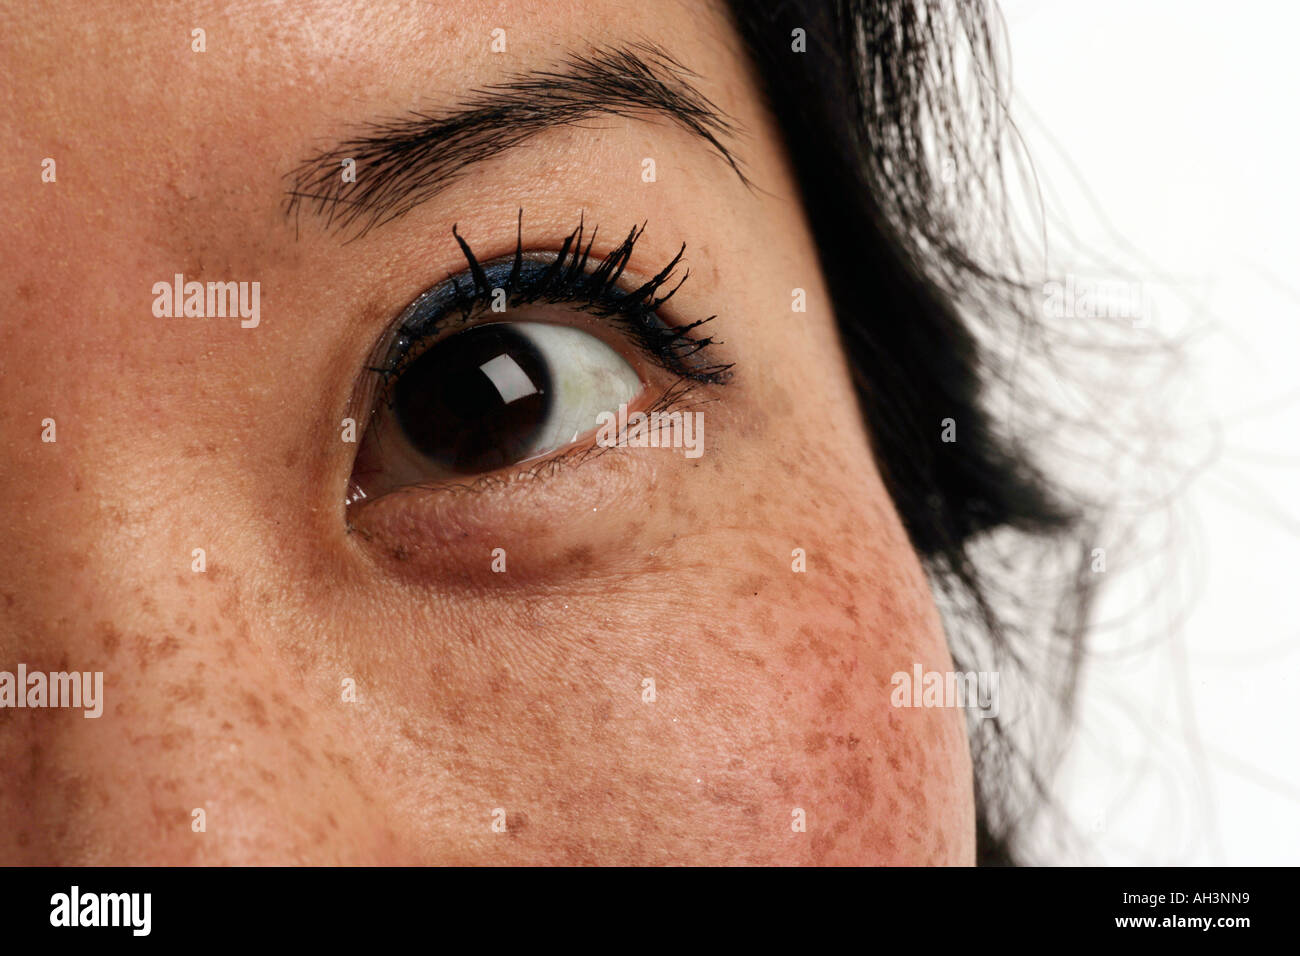 close up of an oriental womans eye Stock Photo